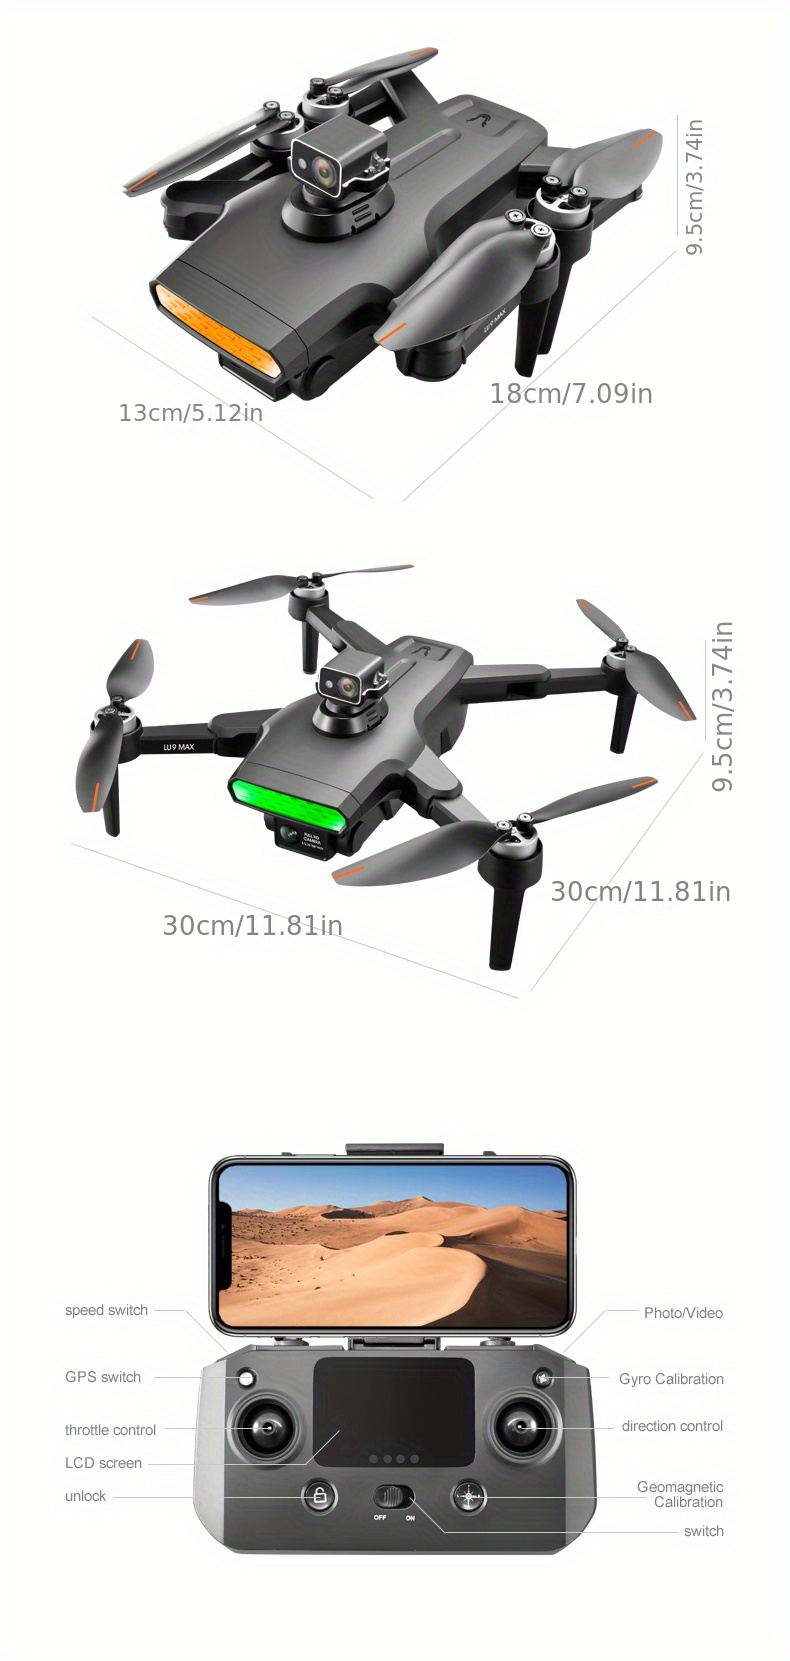 gps drone laser obstacle avoidance uav high definition aerial photography 5g fpv gps brushless remote control aircraft cool 64 color gradient atmosphere light adult children beautiful gift details 18